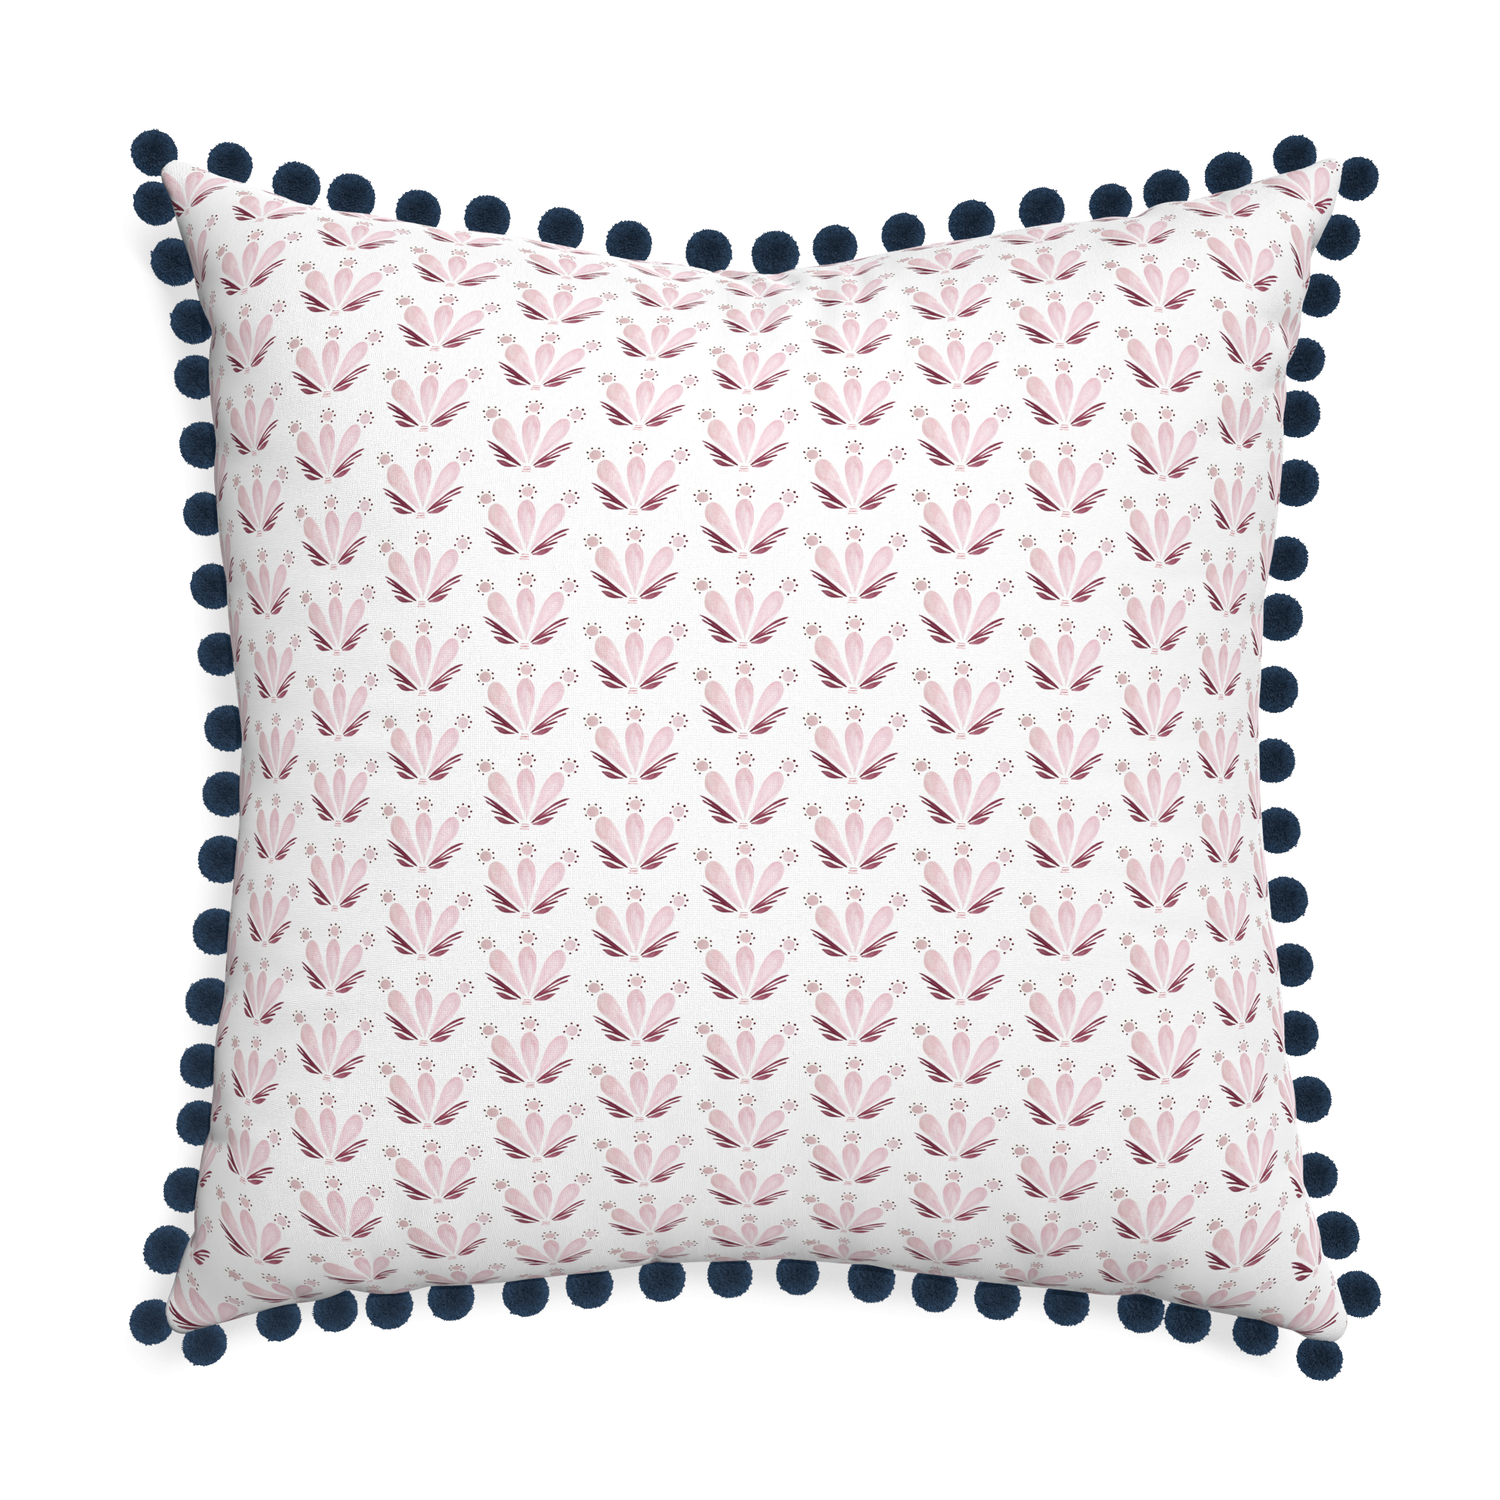 Euro-sham serena pink custom pink & burgundy drop repeat floralpillow with c on white background